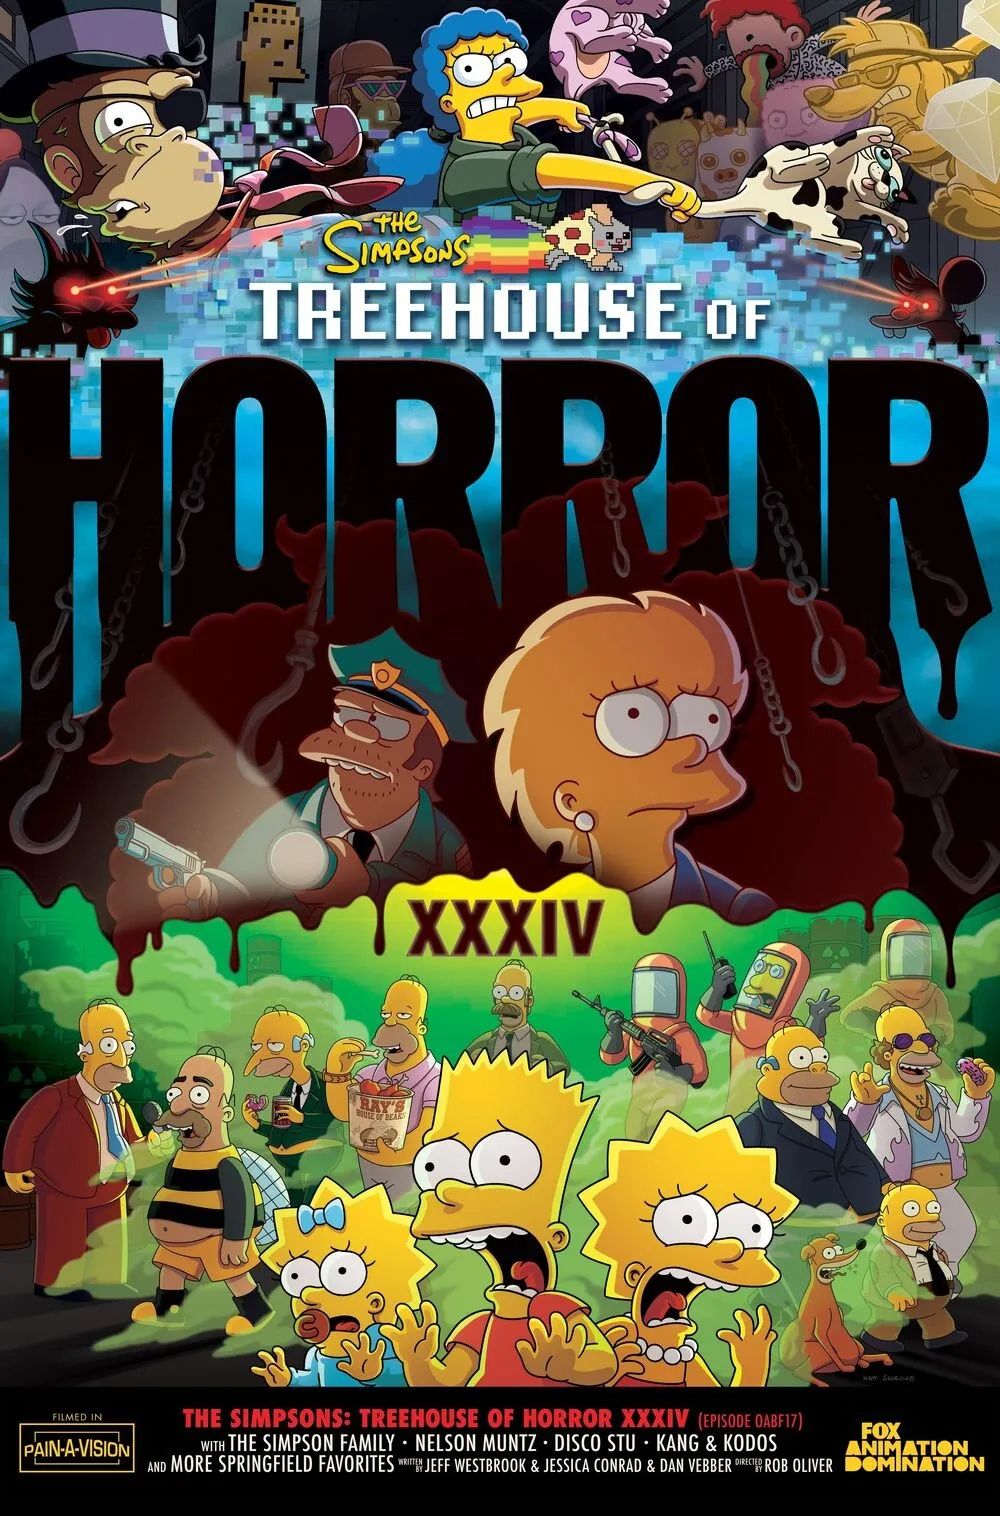 Simpsons Treehouse Of Horror 34 Poster Teases A Beloved Character's